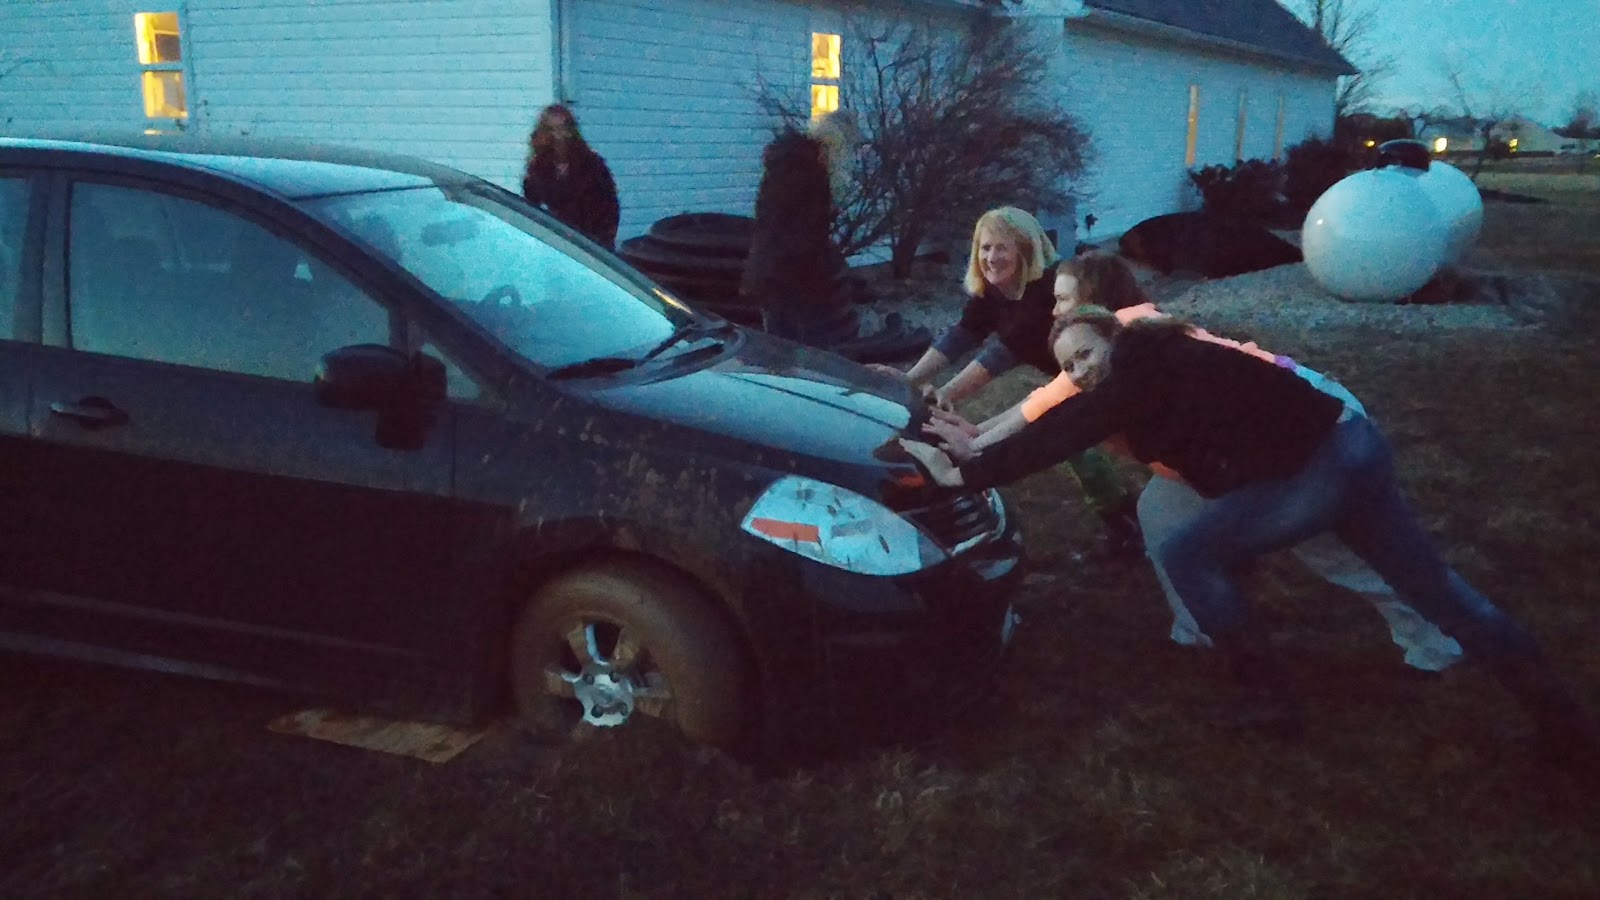 Women Who Got The Car Stuck Pics And Galleries